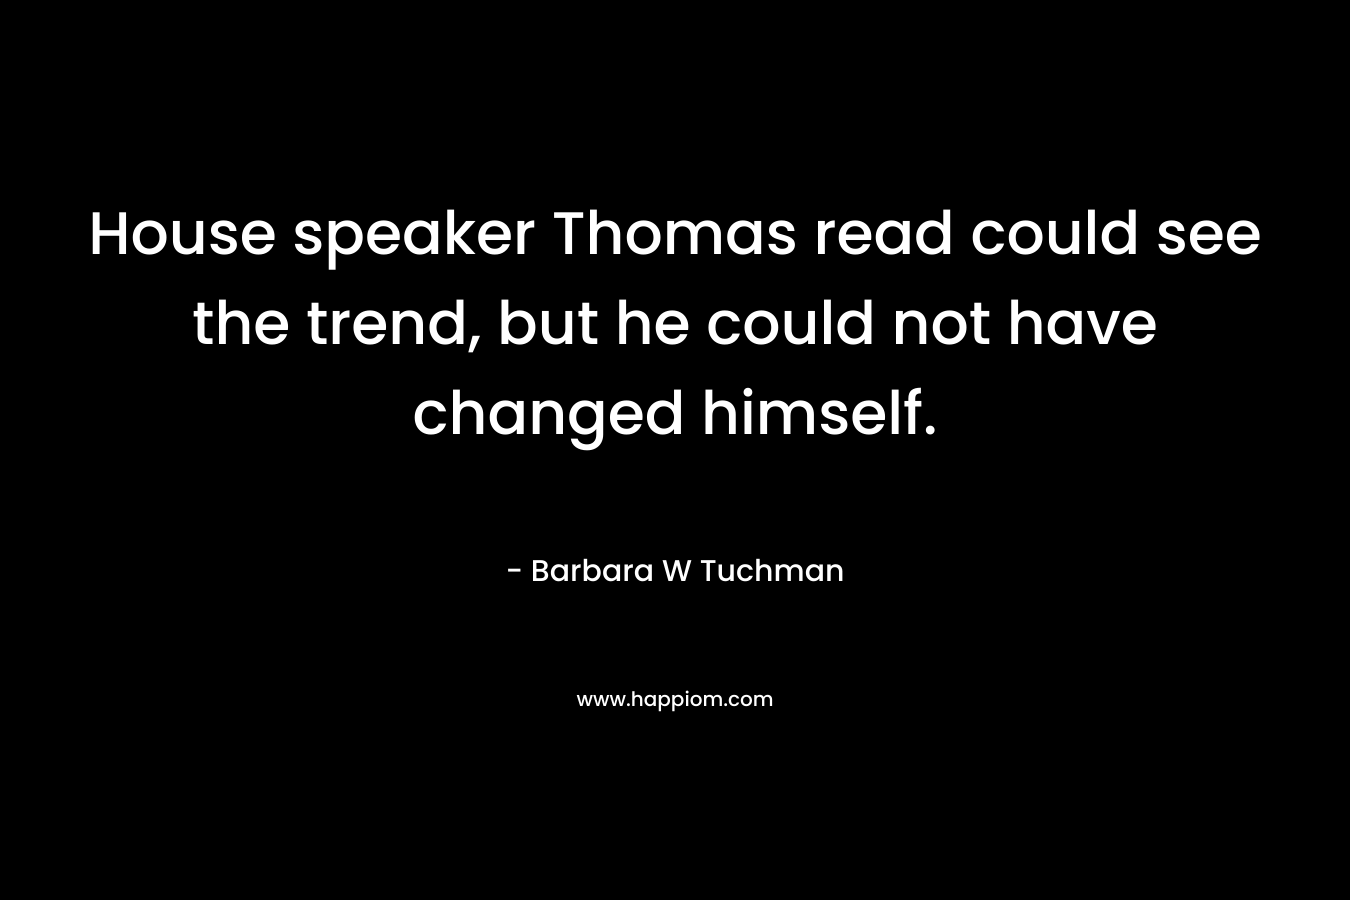 House speaker Thomas read could see the trend, but he could not have changed himself. – Barbara W Tuchman